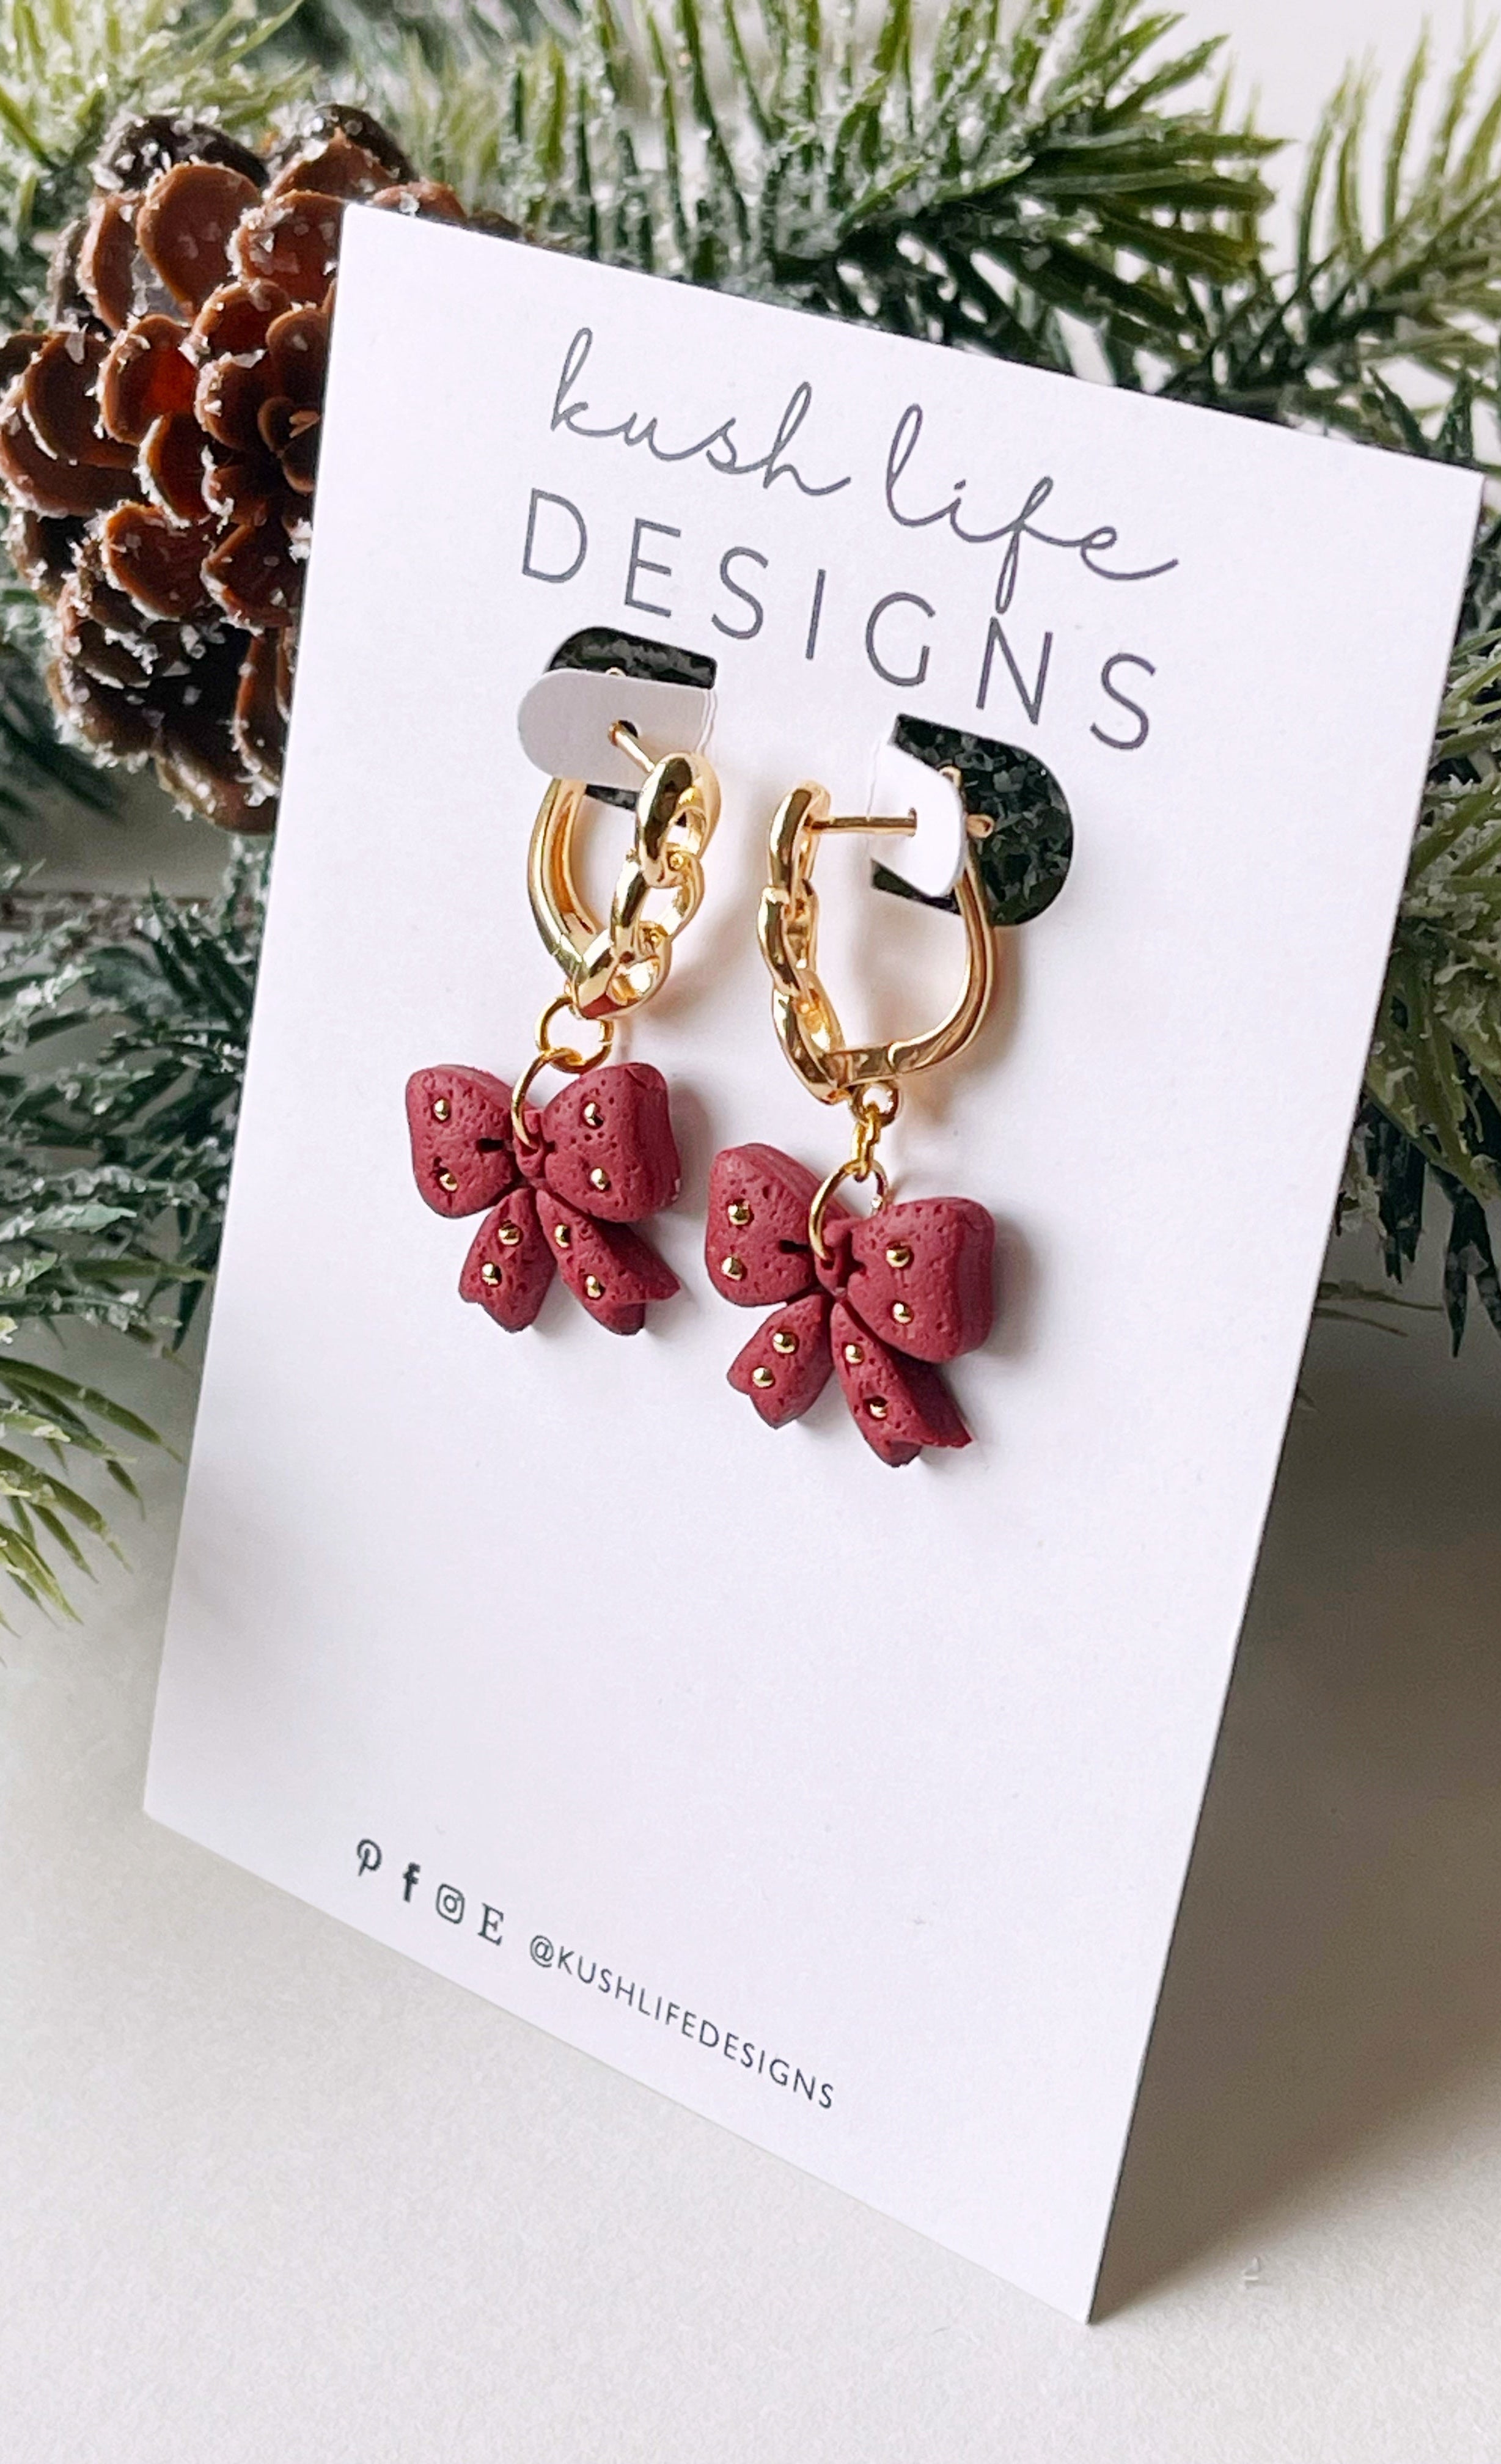 Clay Earrings | Embellished Maroon Bow on Gold Huggies Kush Life Designs